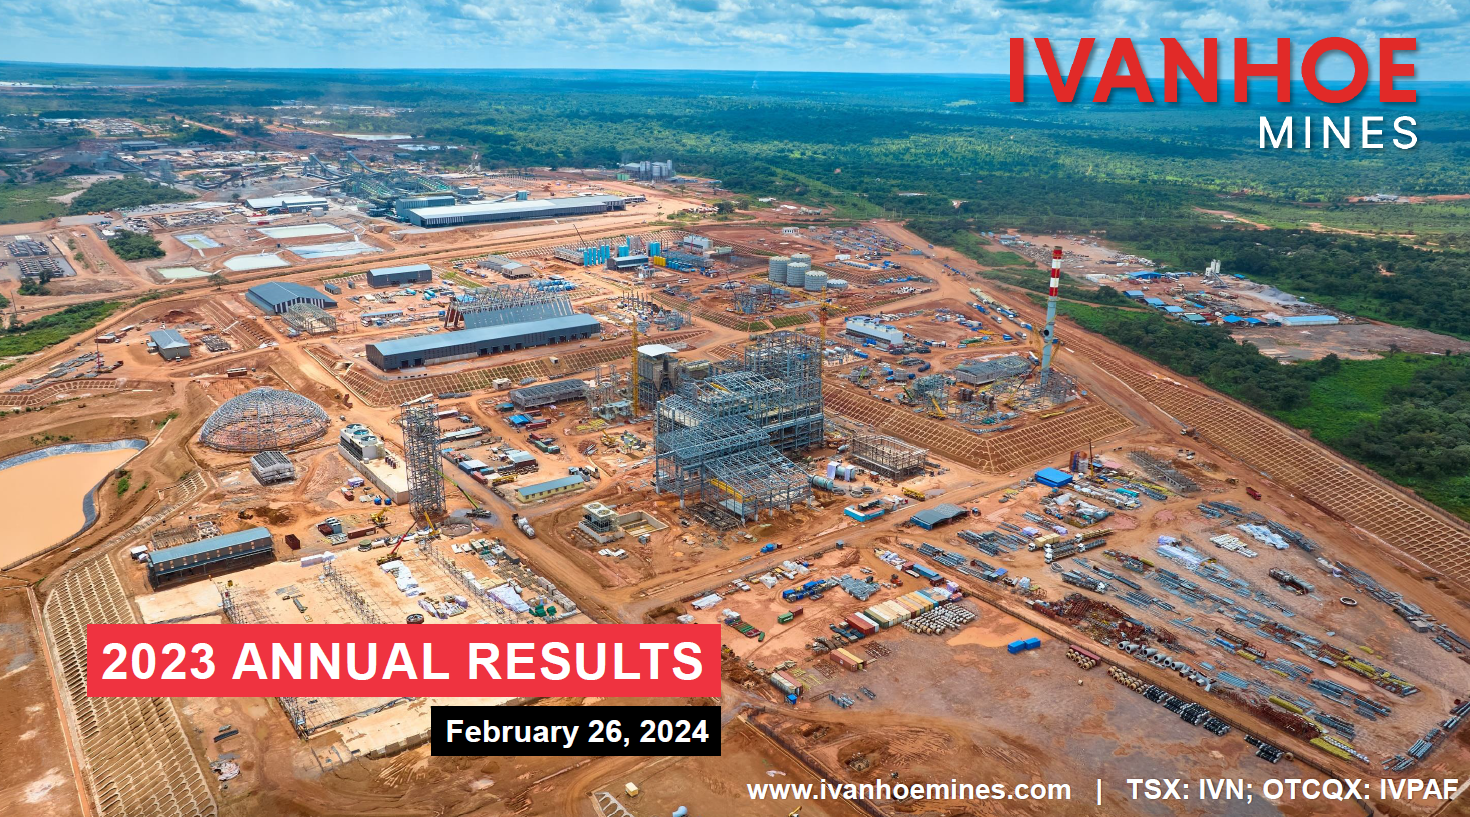 Ivanhoe Mines 2023 Annual Results, February 26, 2024